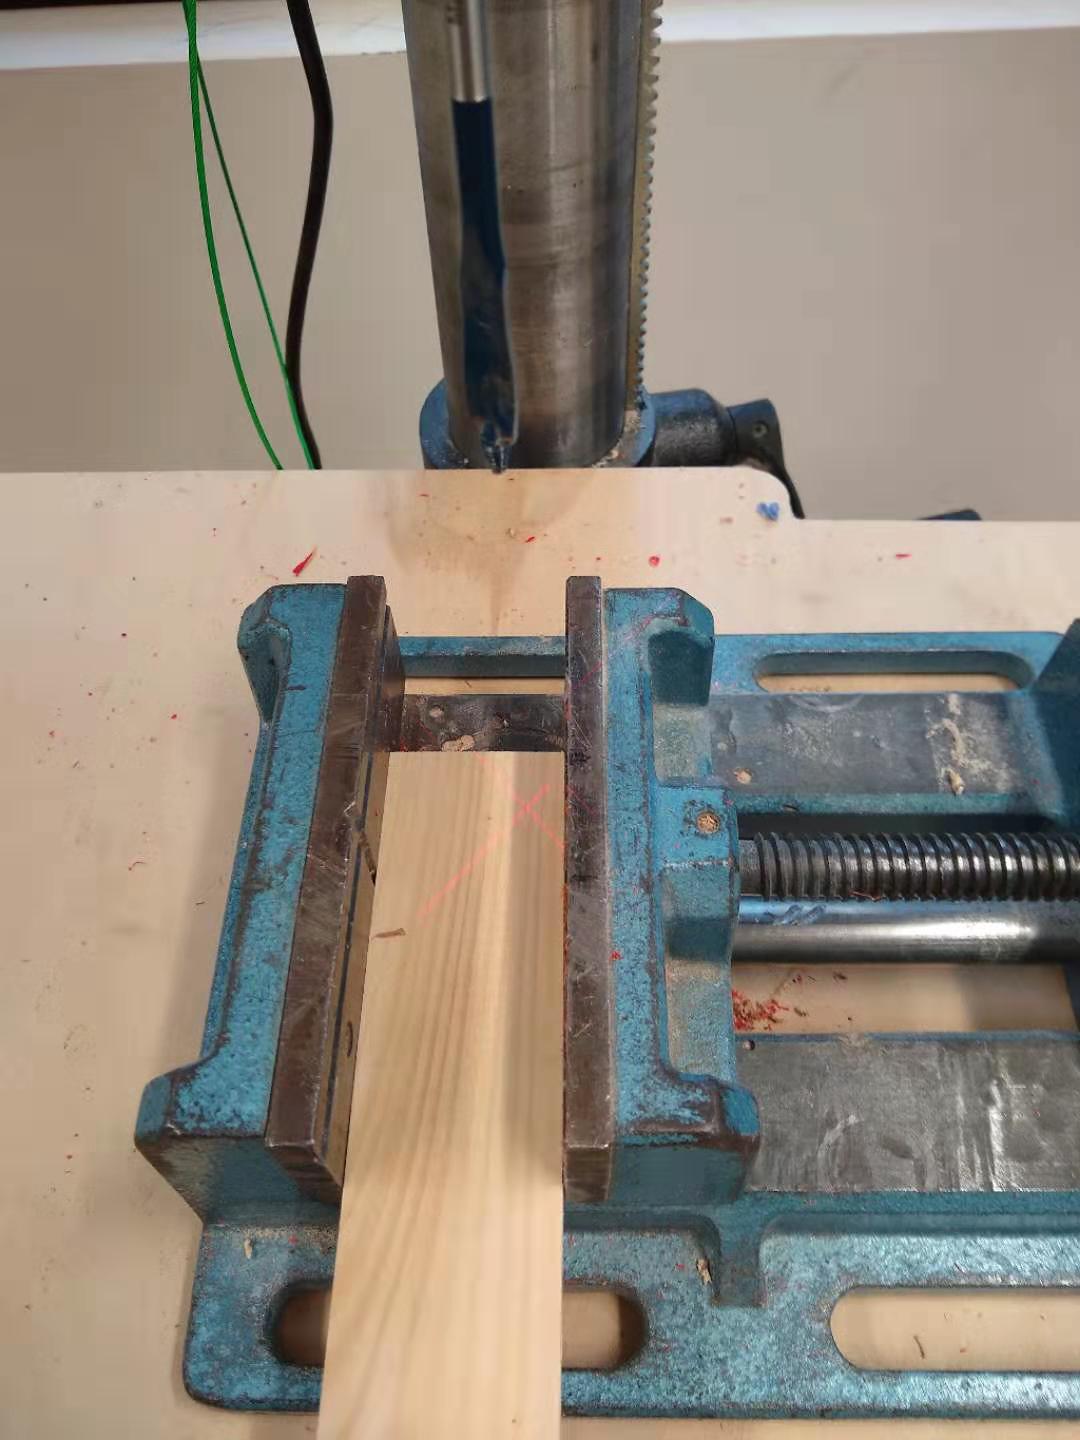 A piece of wood under the drill press.